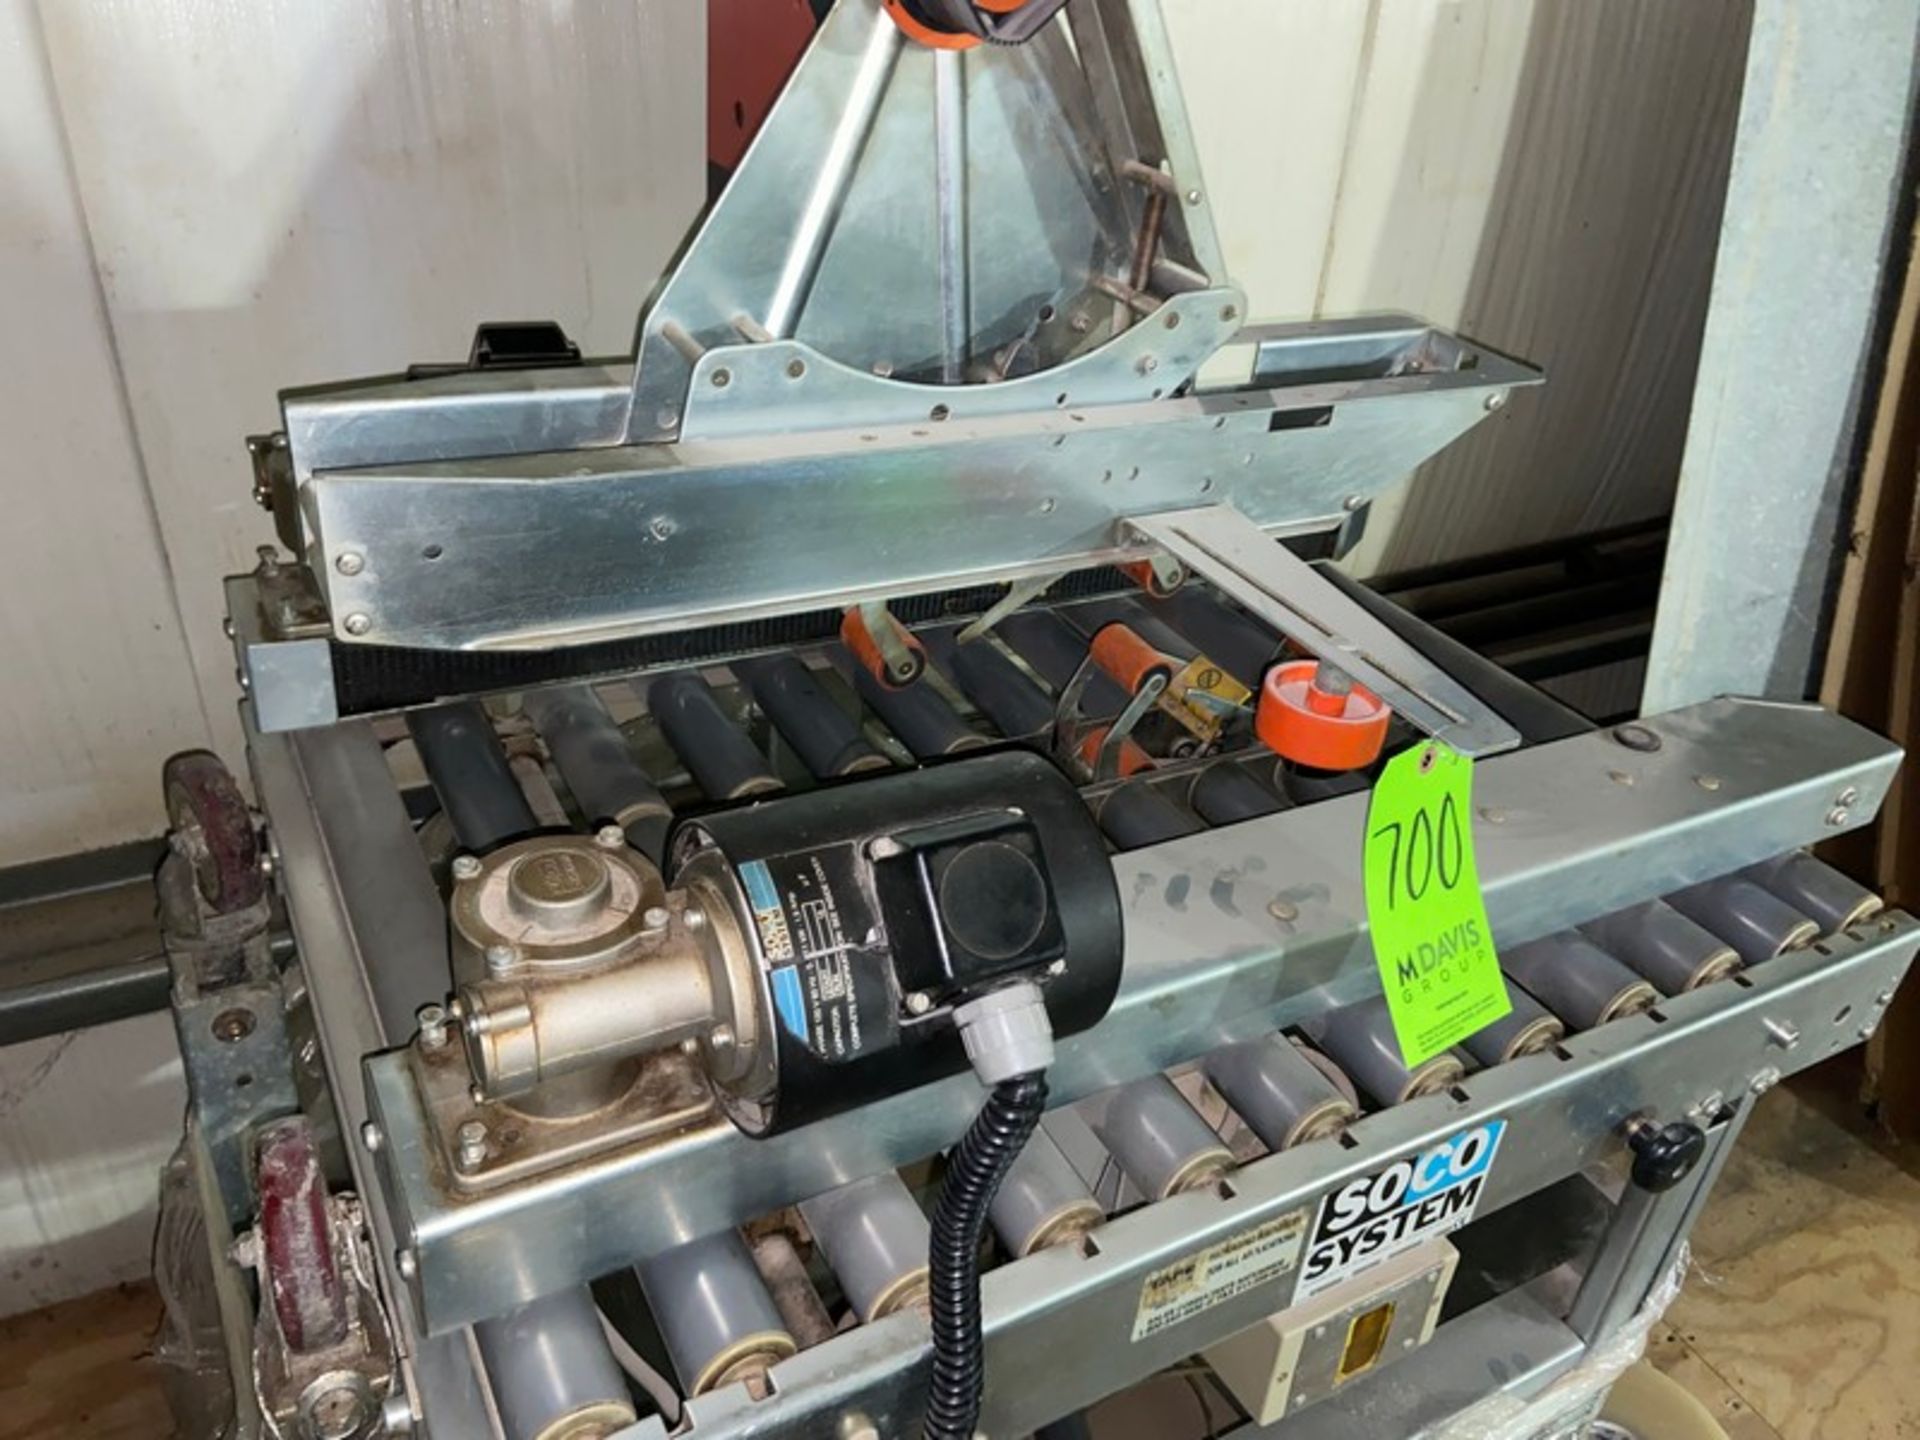 SOCO SYSTEMS TOP & BOTTOM CASE SEALER, WITH TOP & BOTTOM TAPE HEADS MOUNTED ON CASTERS (LOCATED IN - Image 4 of 6